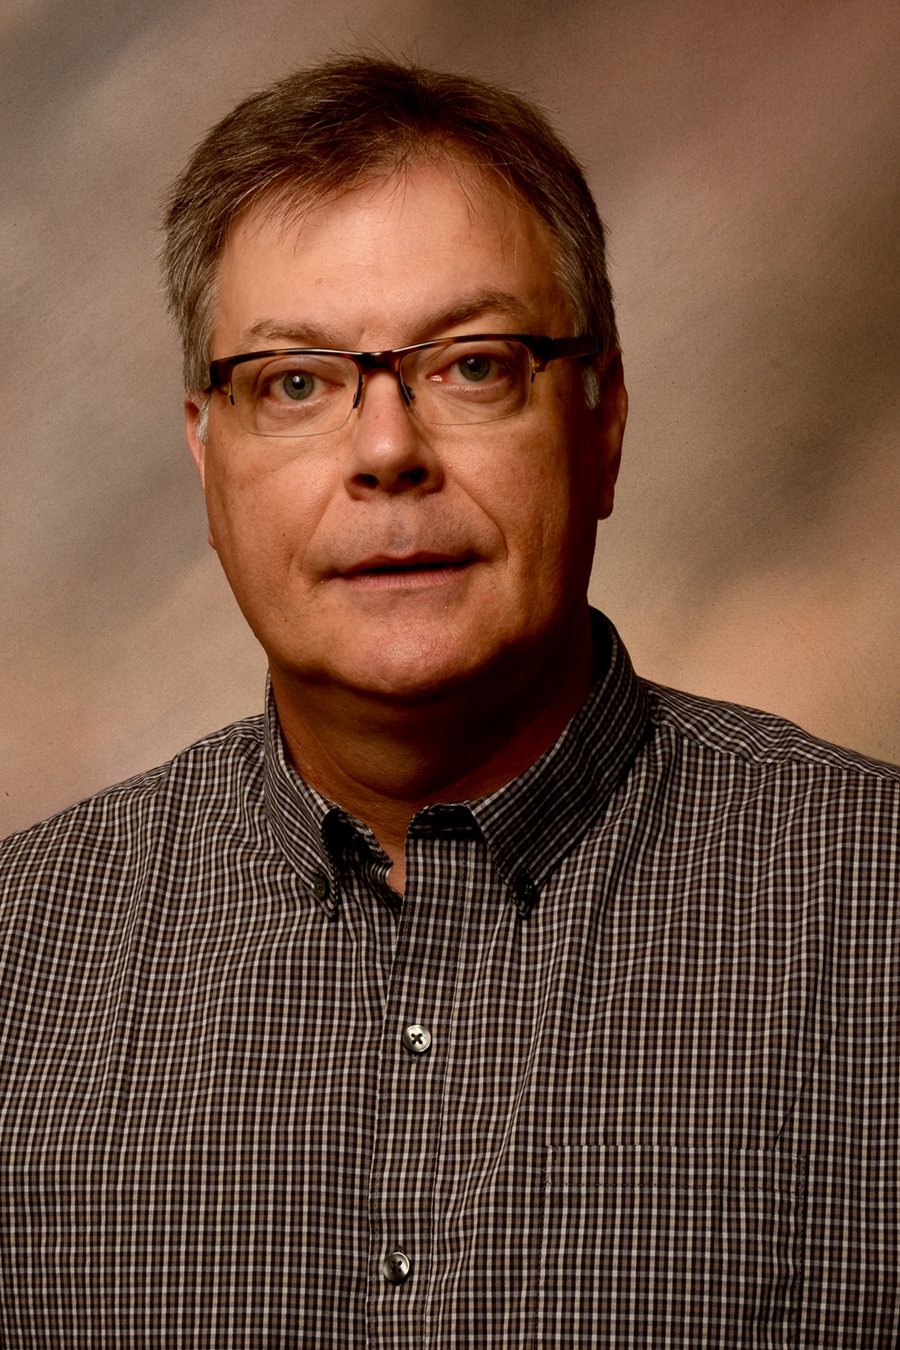 Professor Ken Korth has been named interim head of the combined departments of entomology and plant pathology.